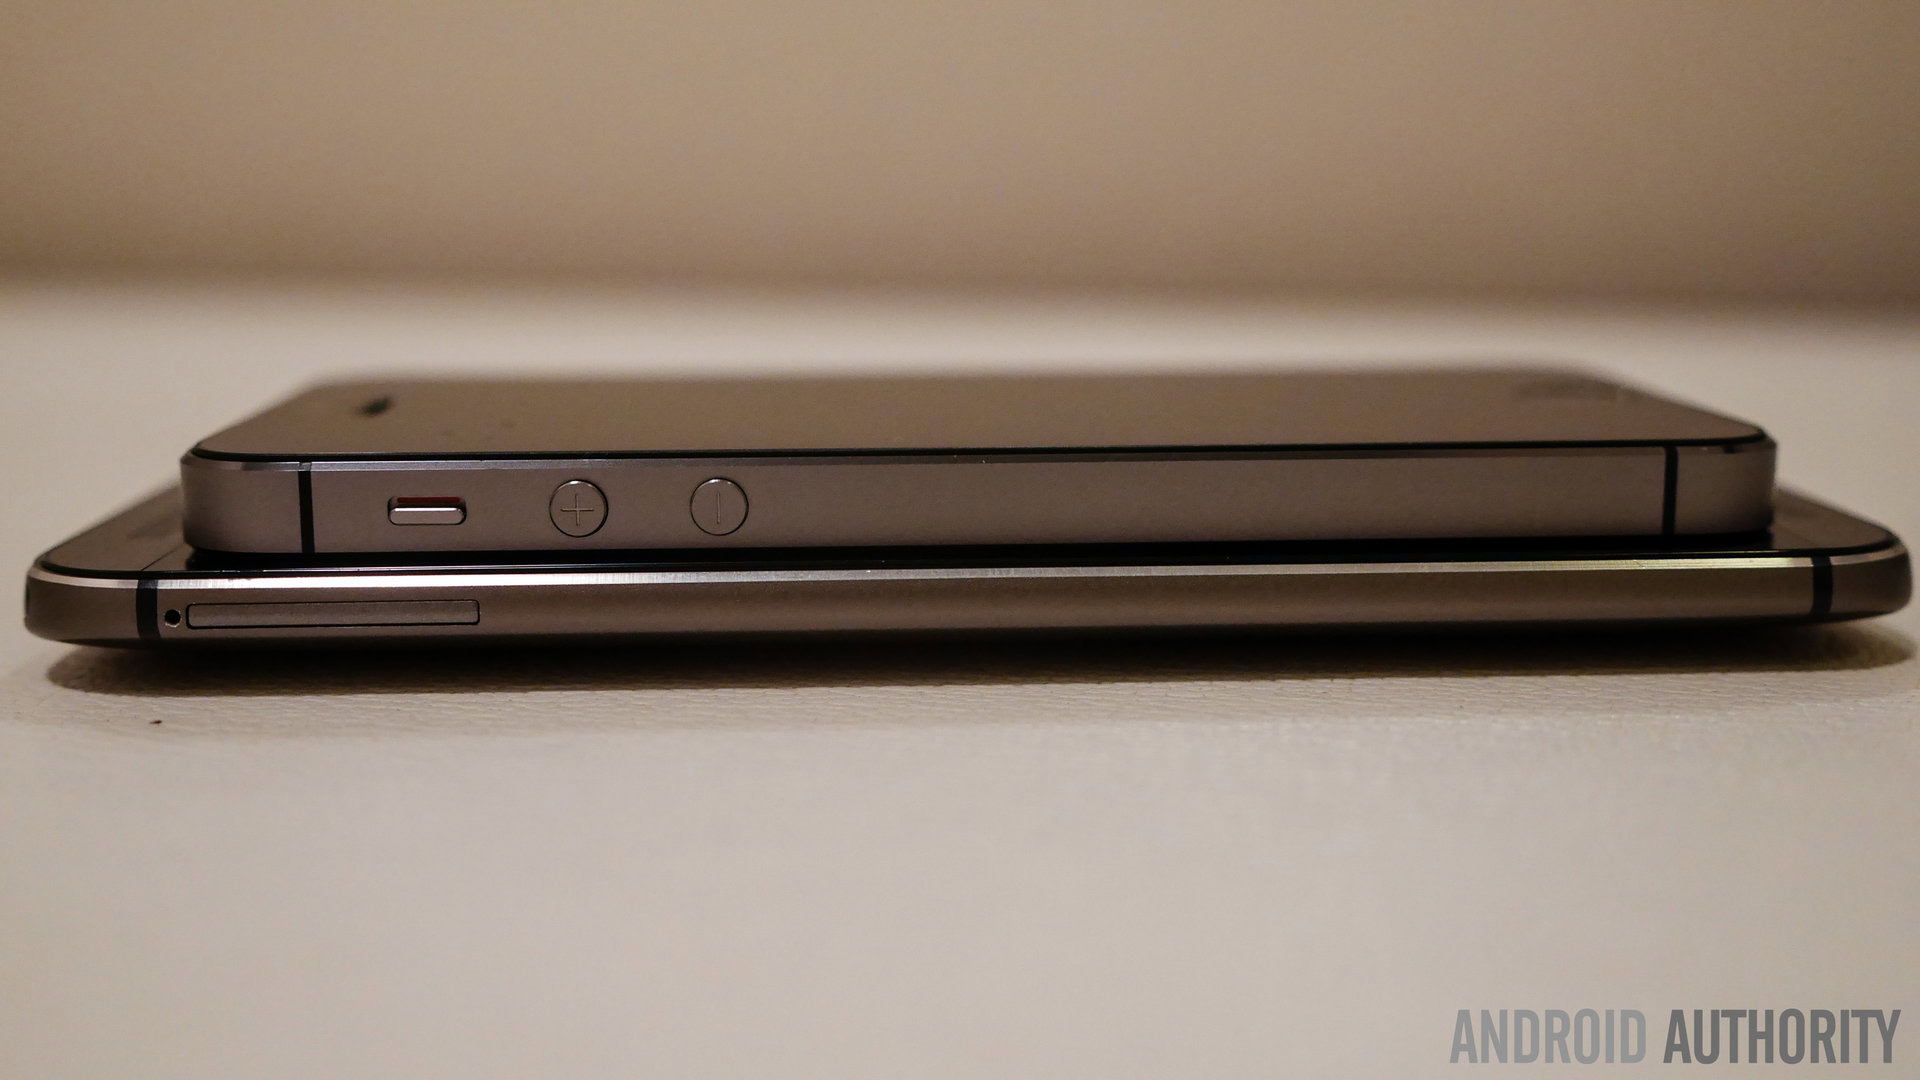 htc one m8 vs iphone 5s quick look aa (7 of 15)